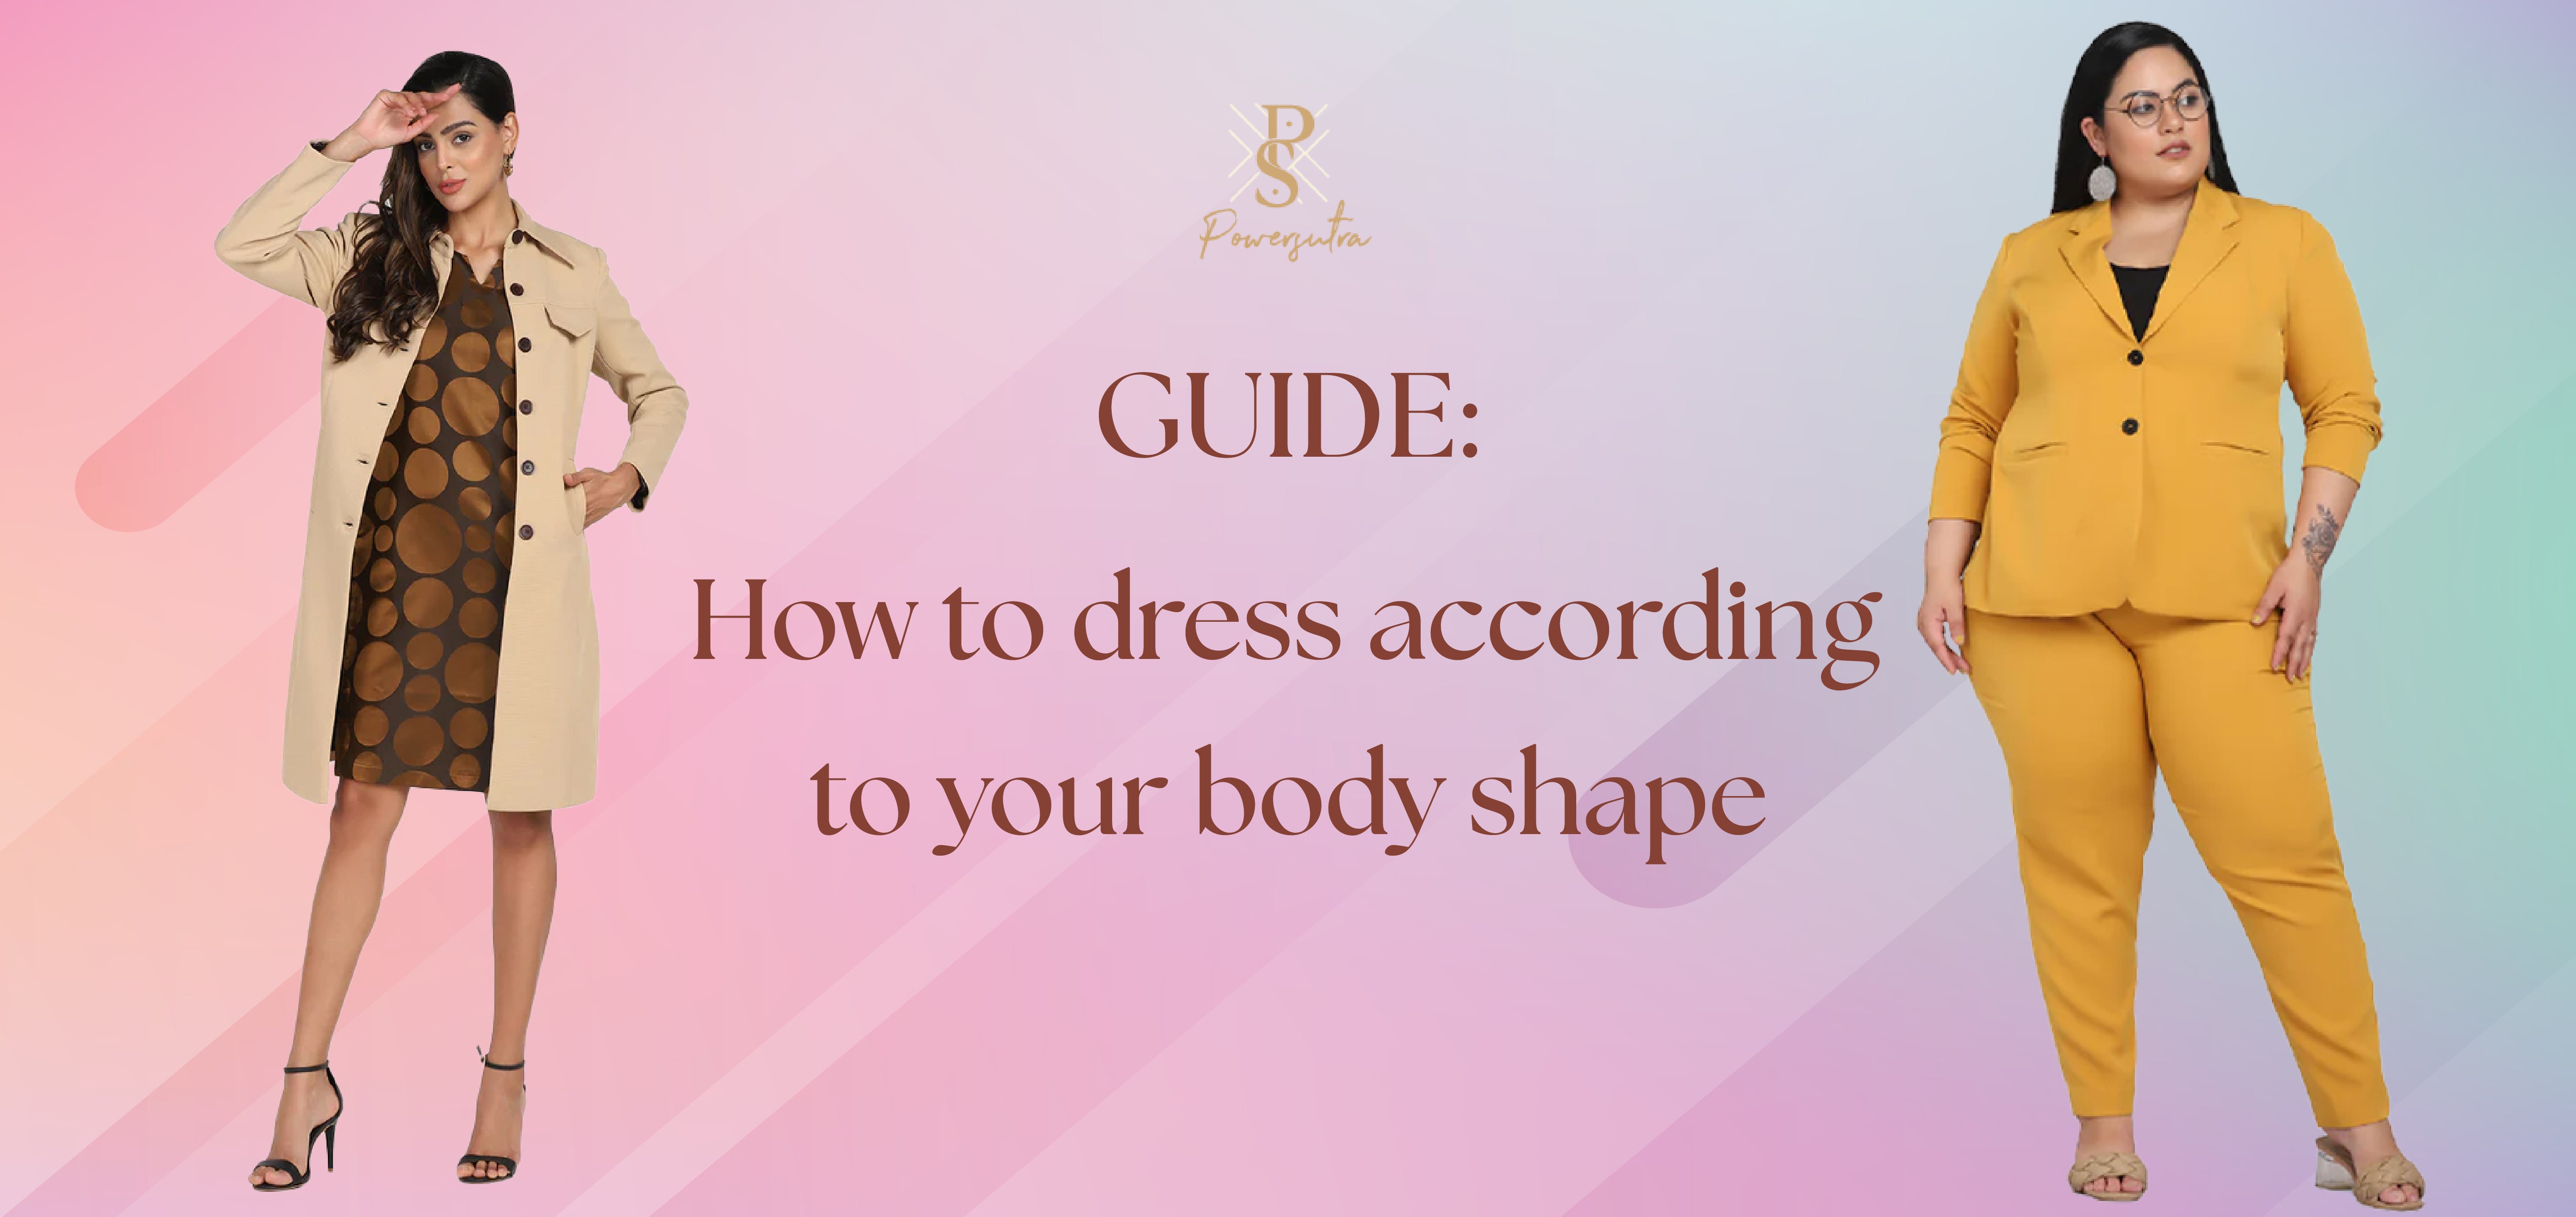 Guide: How to dress according to your body shape